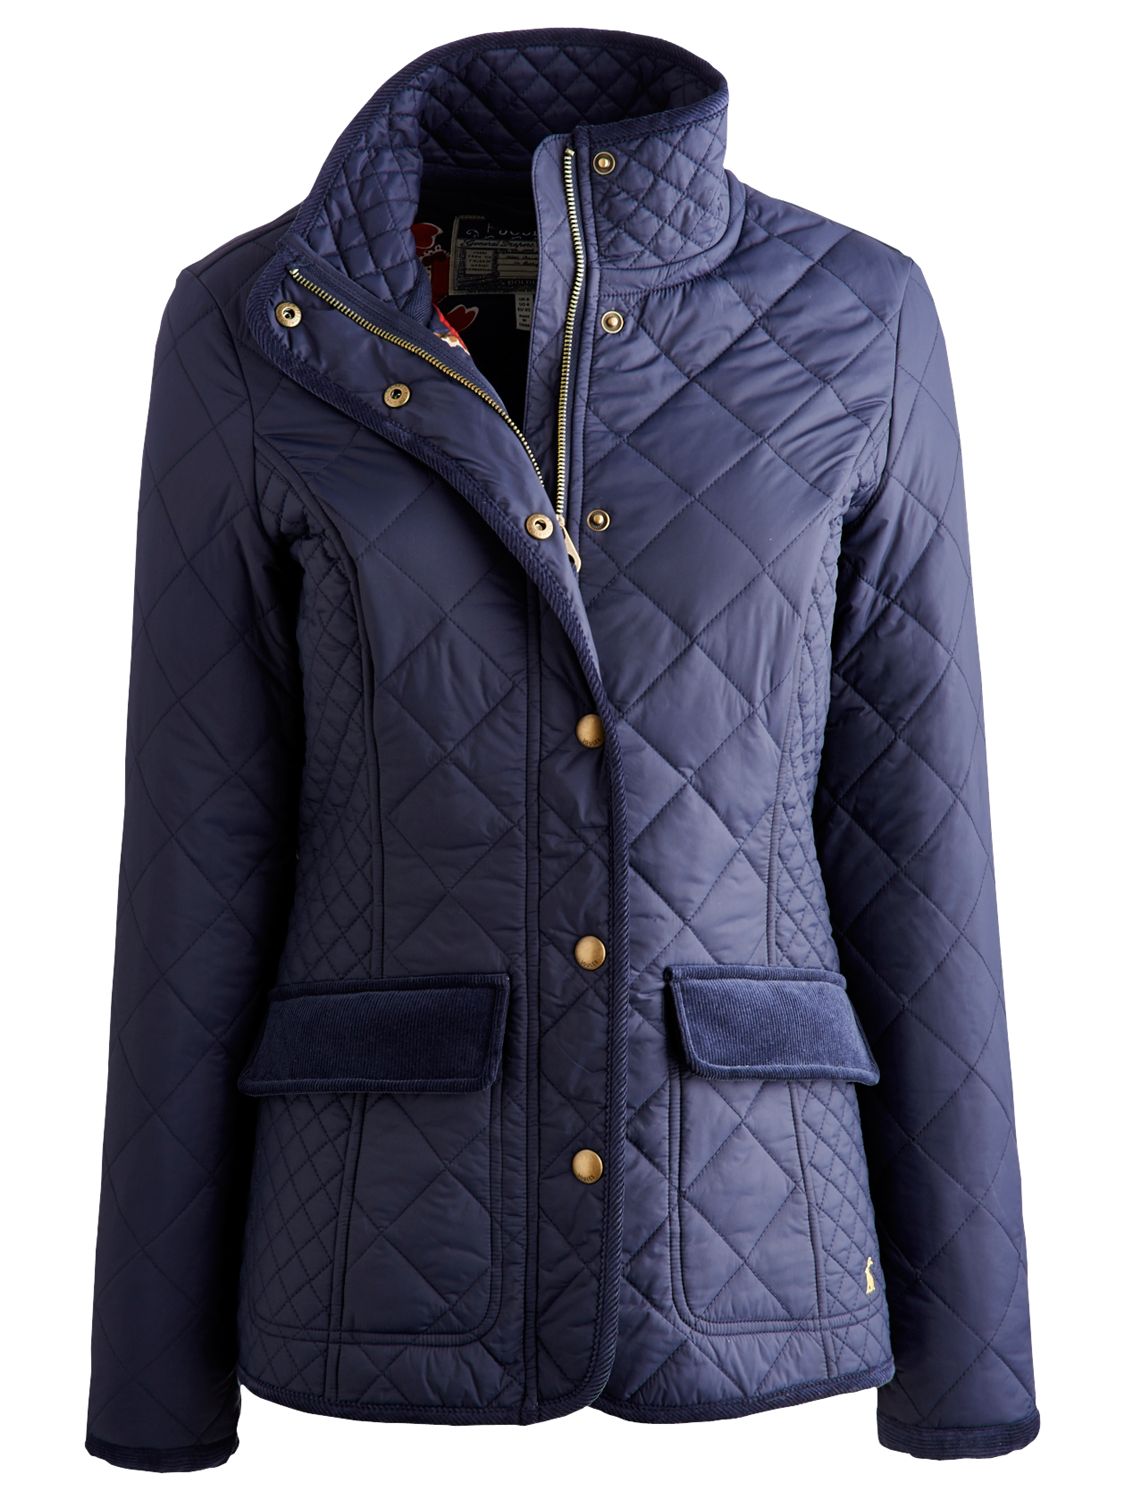 Joules Moredale Quilt Jacket, Marine Navy